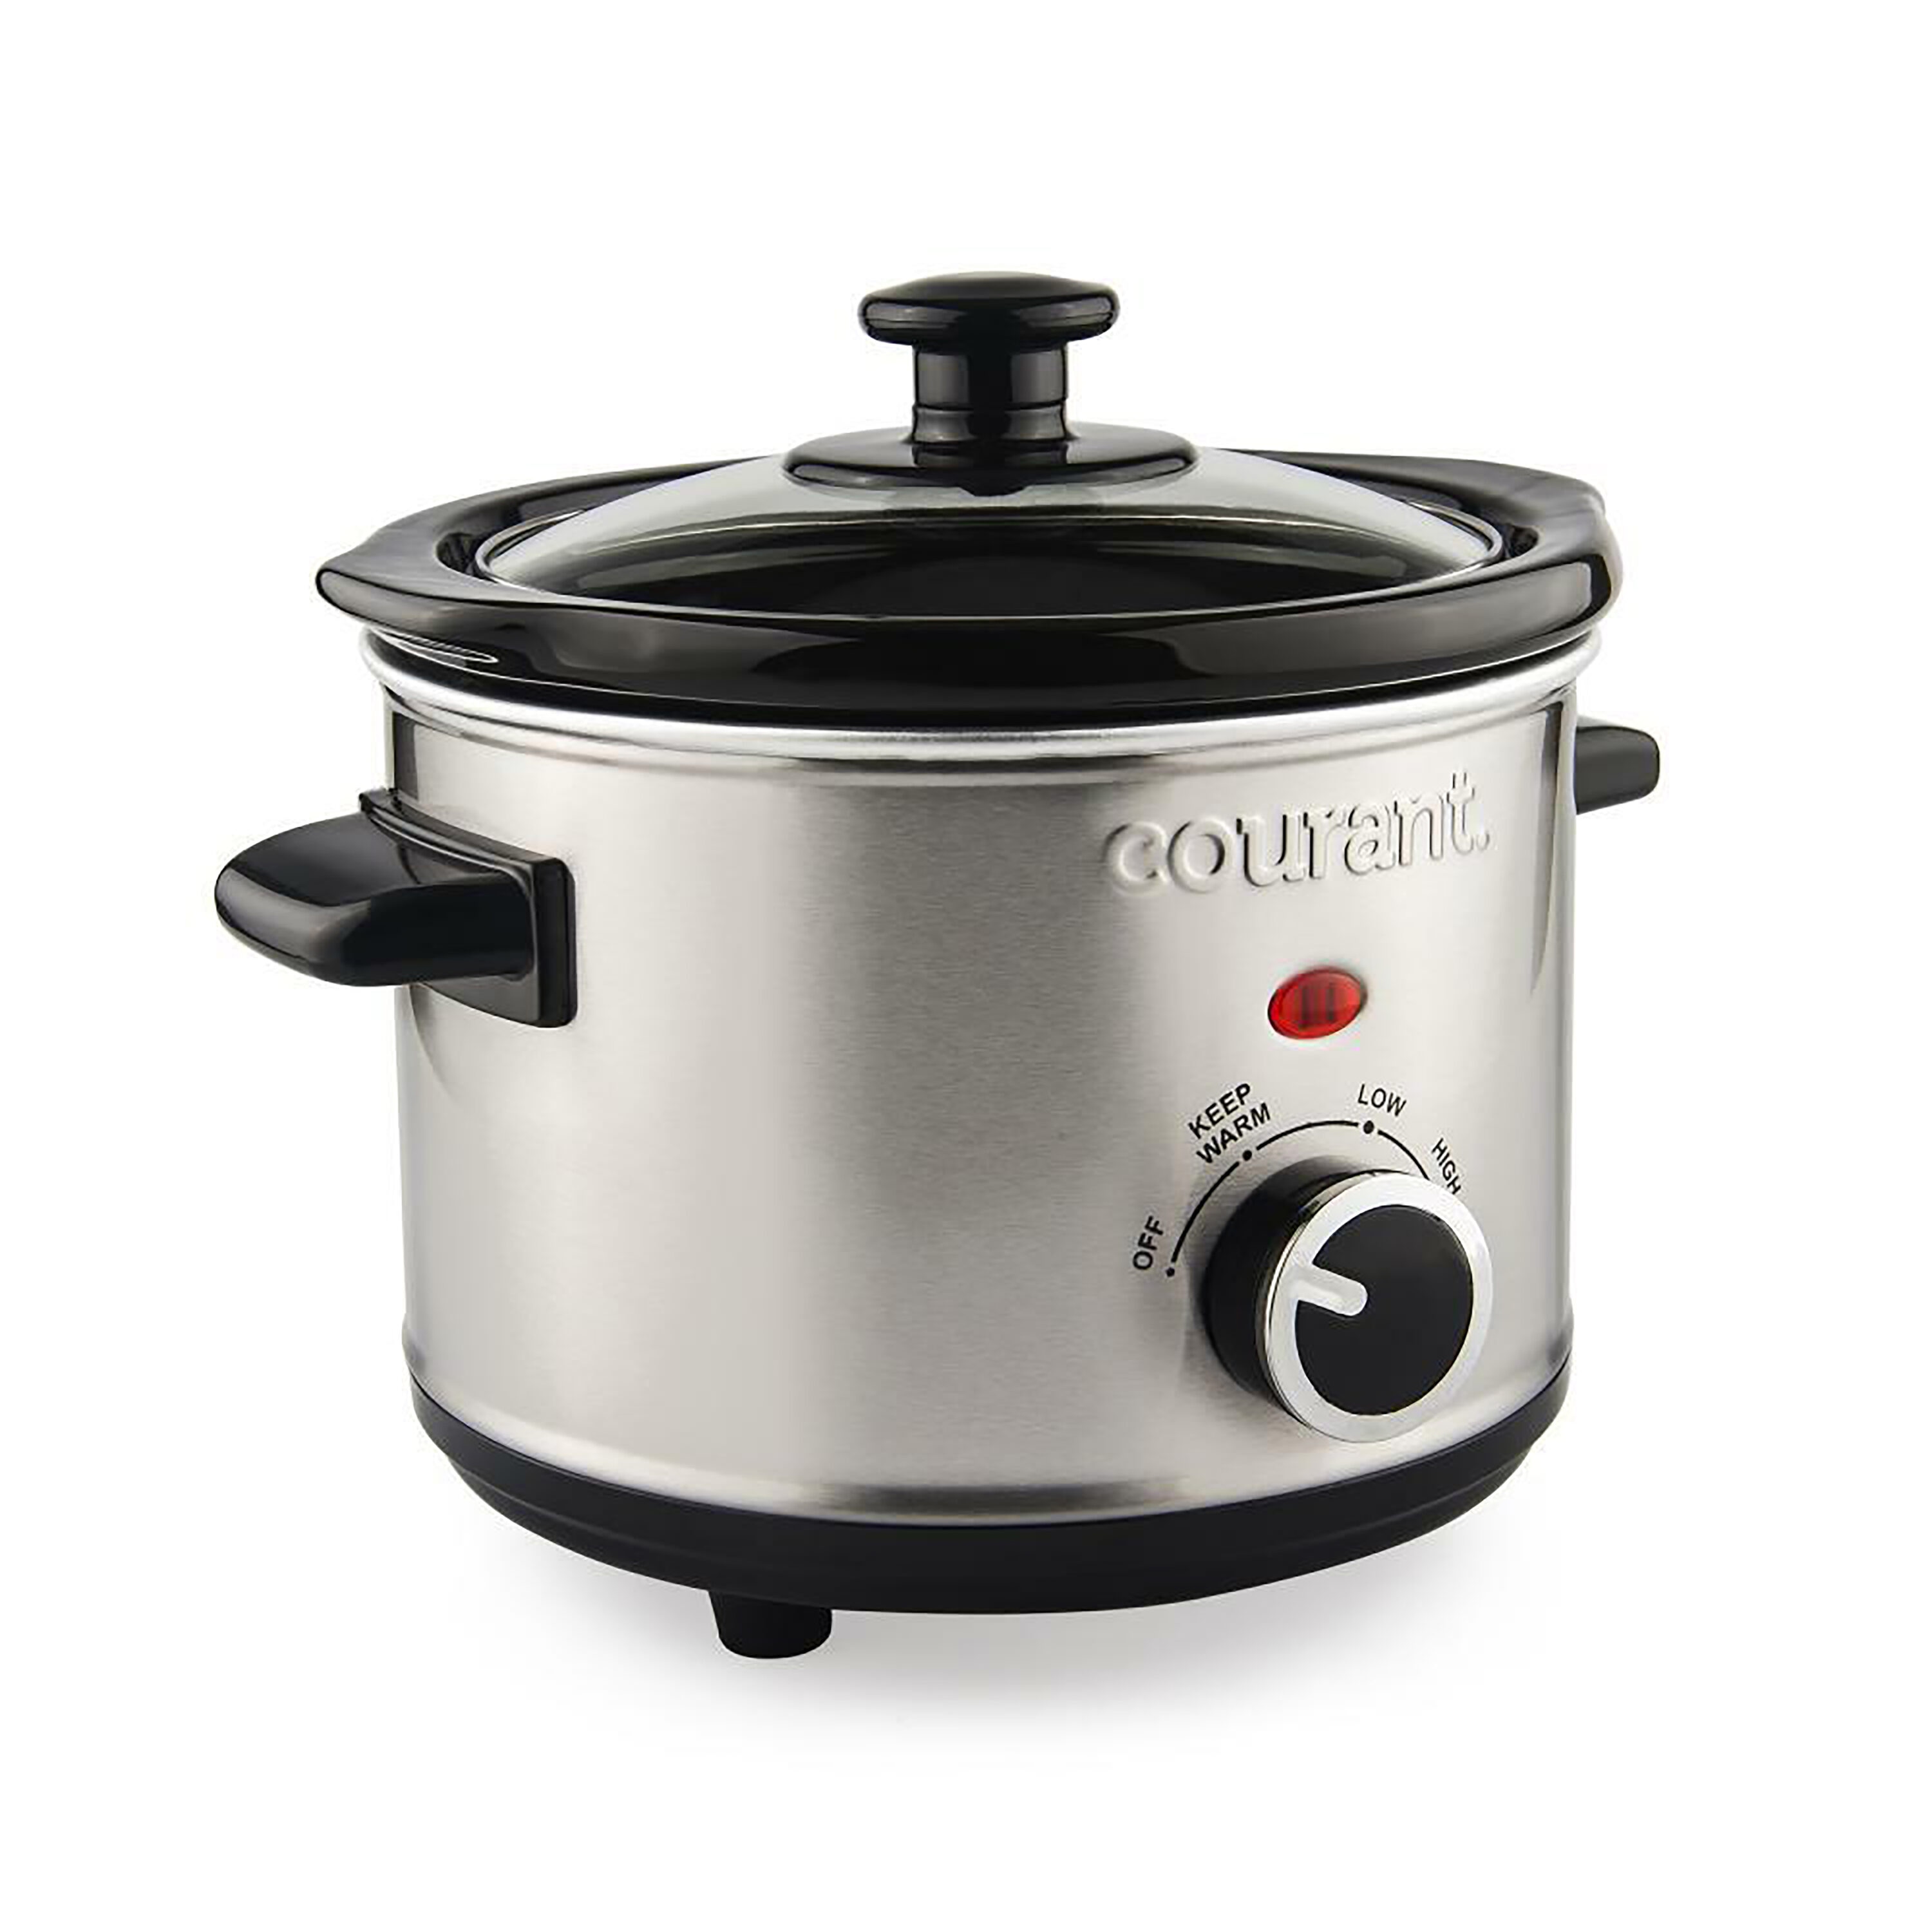 Megachef Triple 2.5 Quart Slow Cooker And Buffet Server In Brushed Silver  And Black Finish With 3 Ceramic Cooking Pots And Removable Lid Rests :  Target